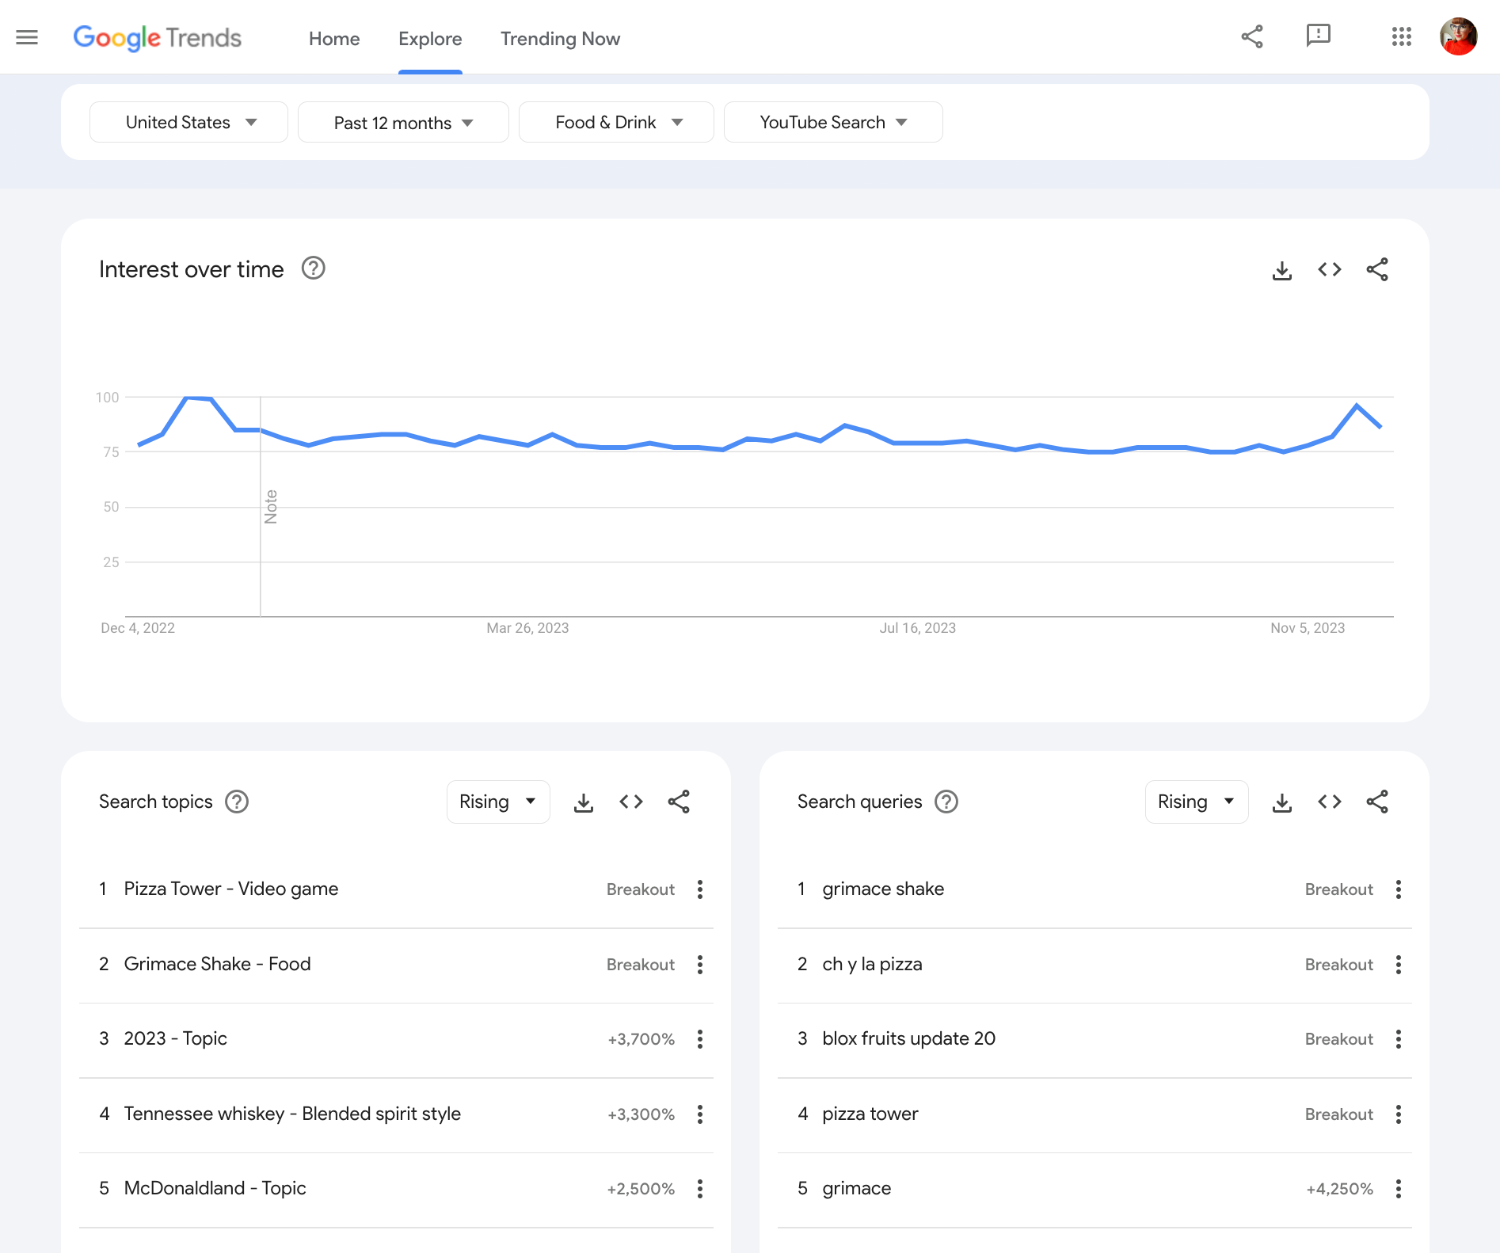 Google Trends view showing top YouTube trends